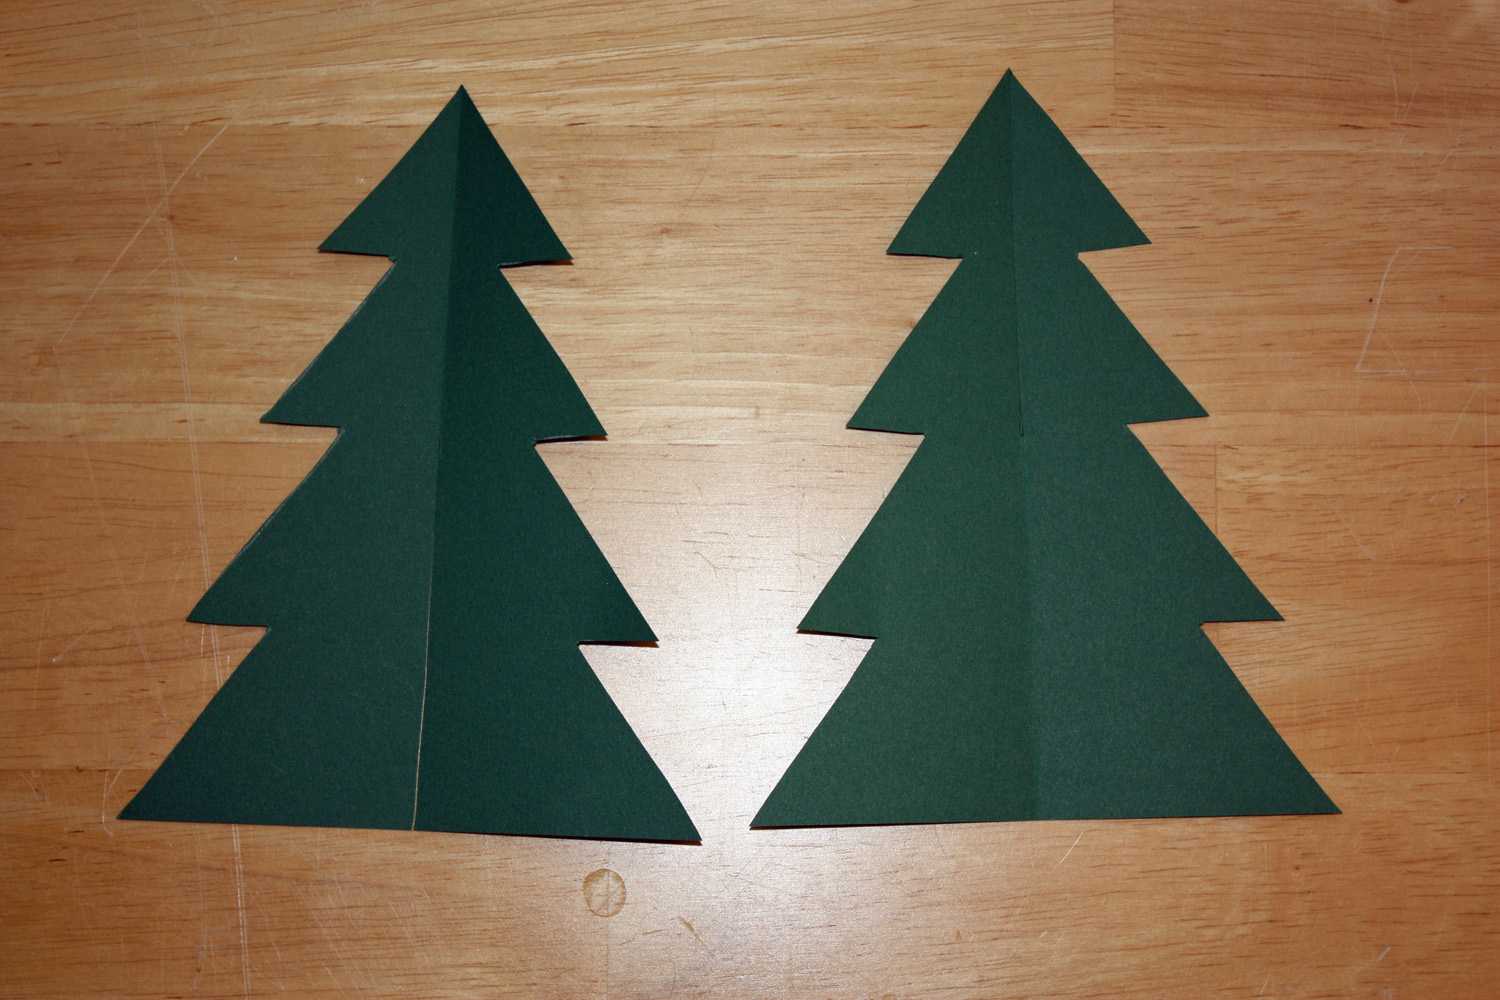 Craft And Activities For All Ages!: Make A 3D Card Christmas With 3D Christmas Tree Card Template